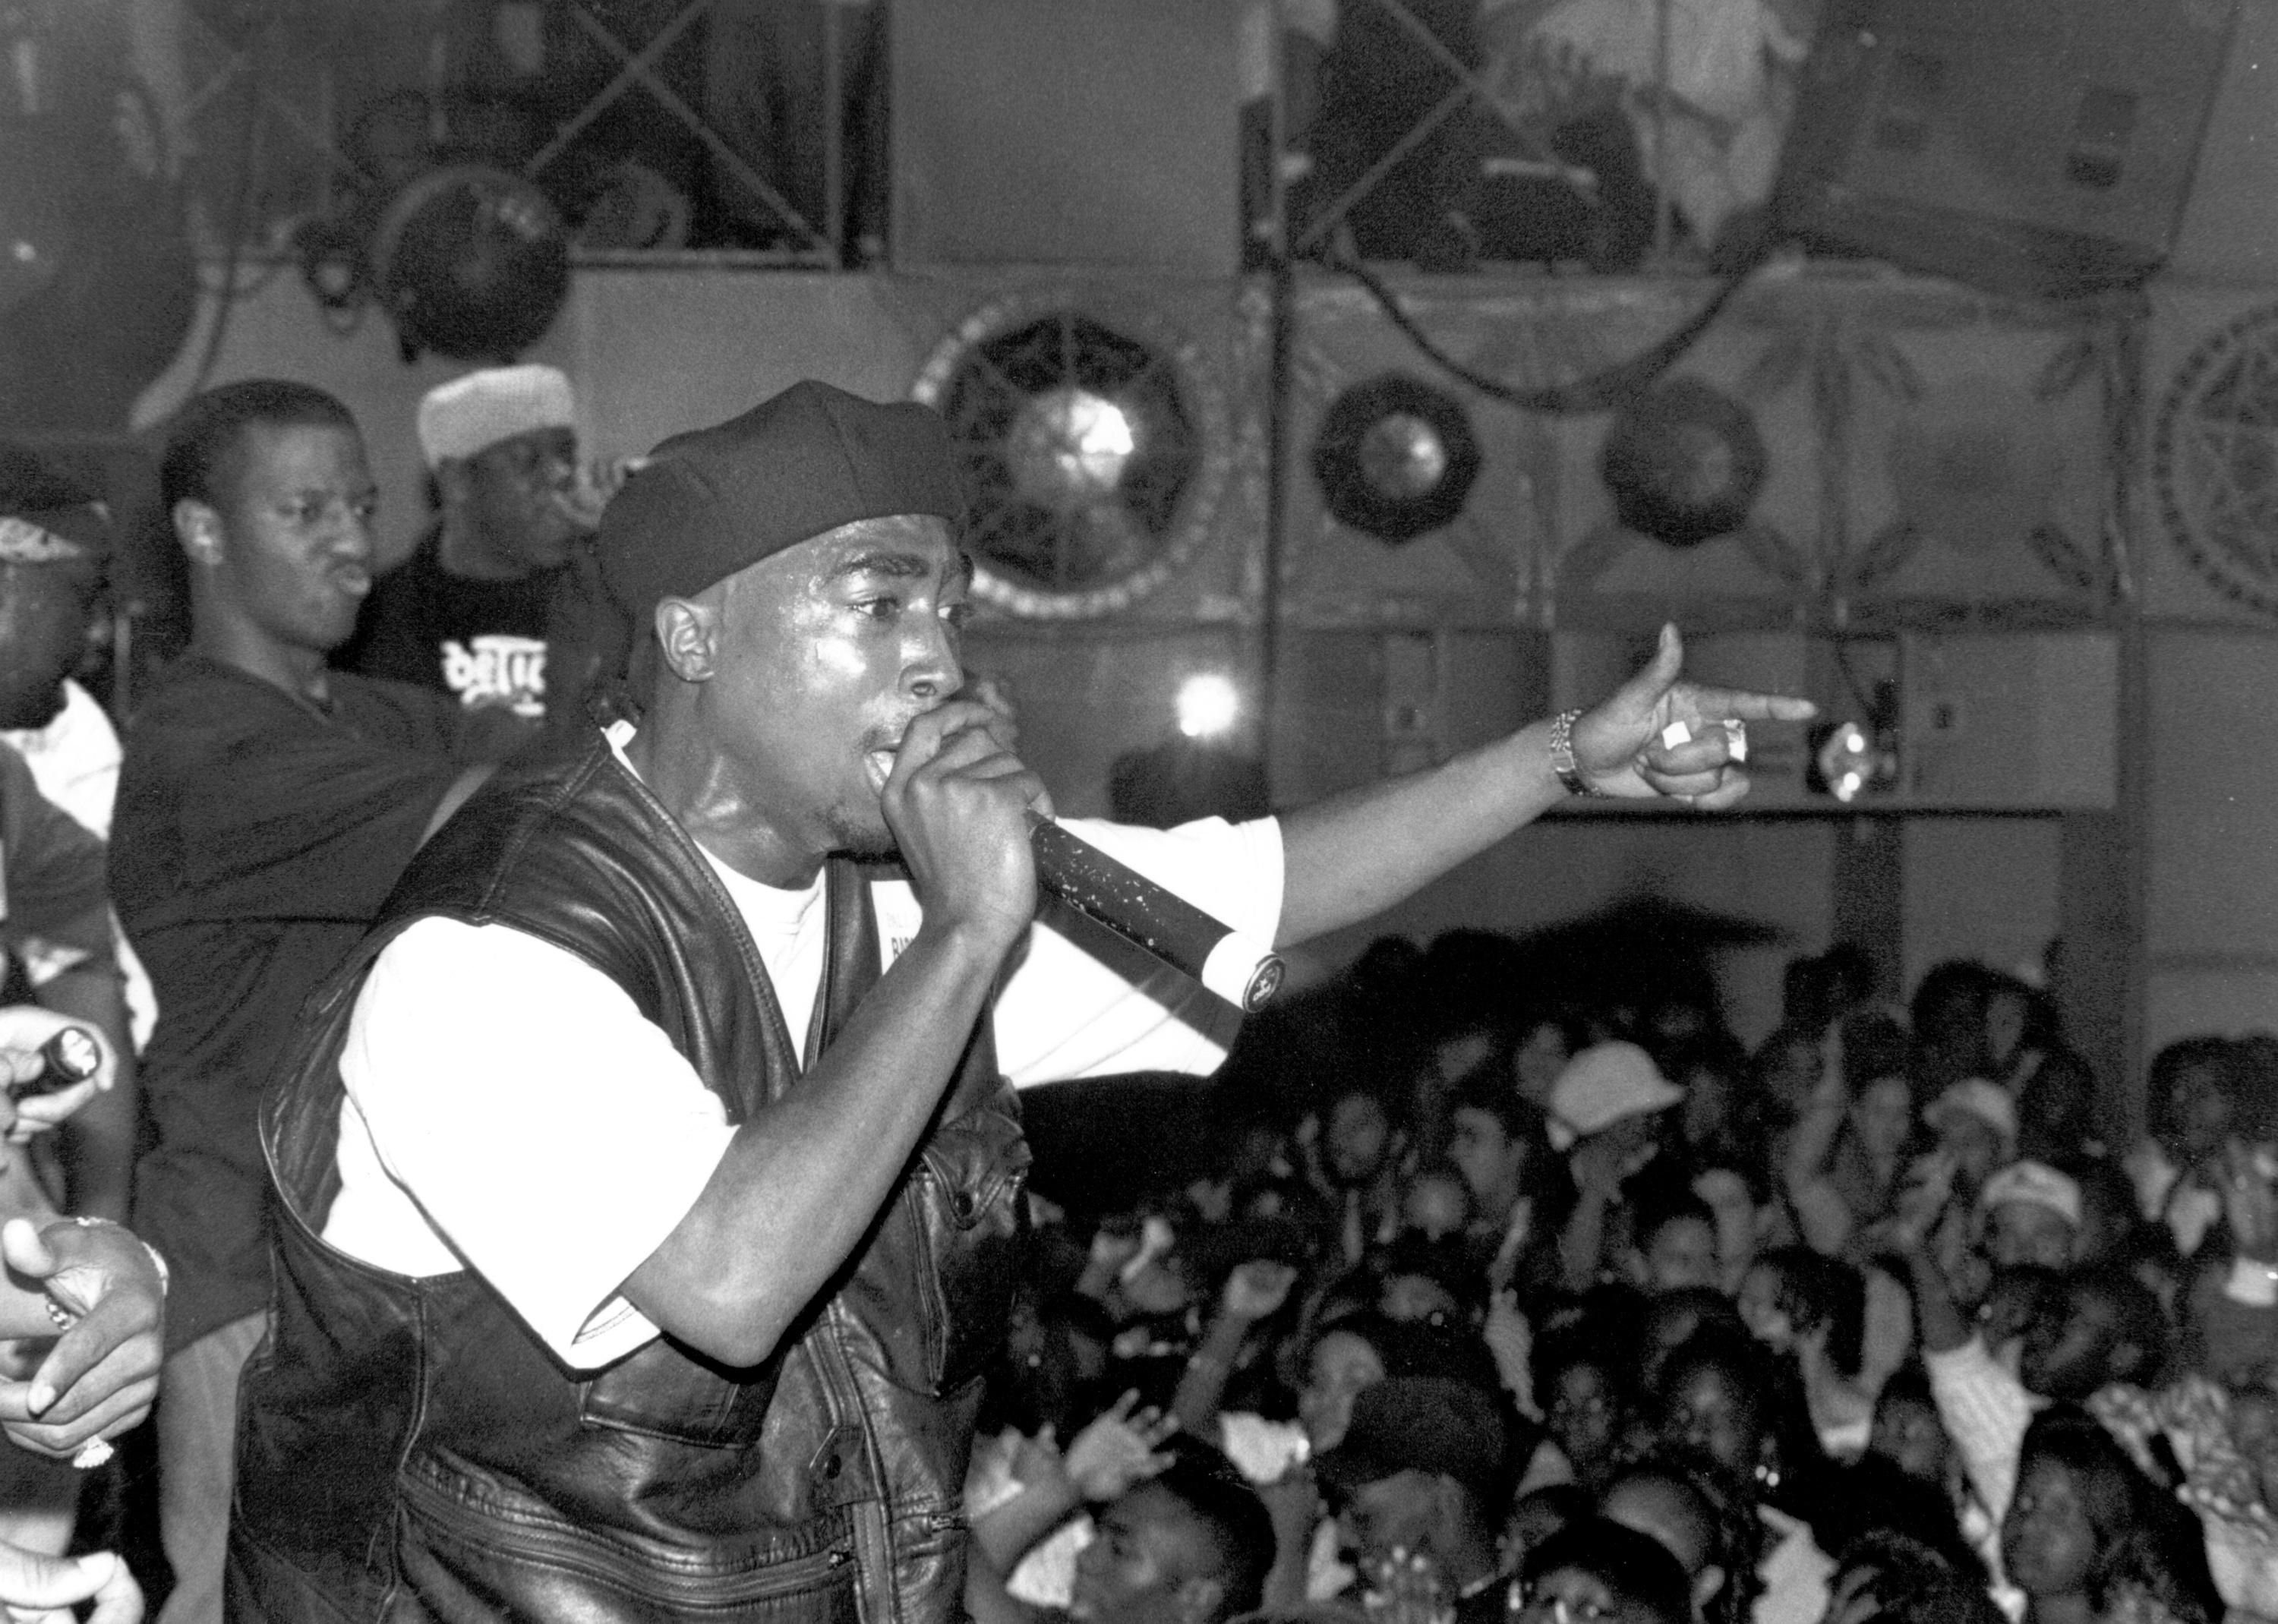 Tupac performing to a large crowd.